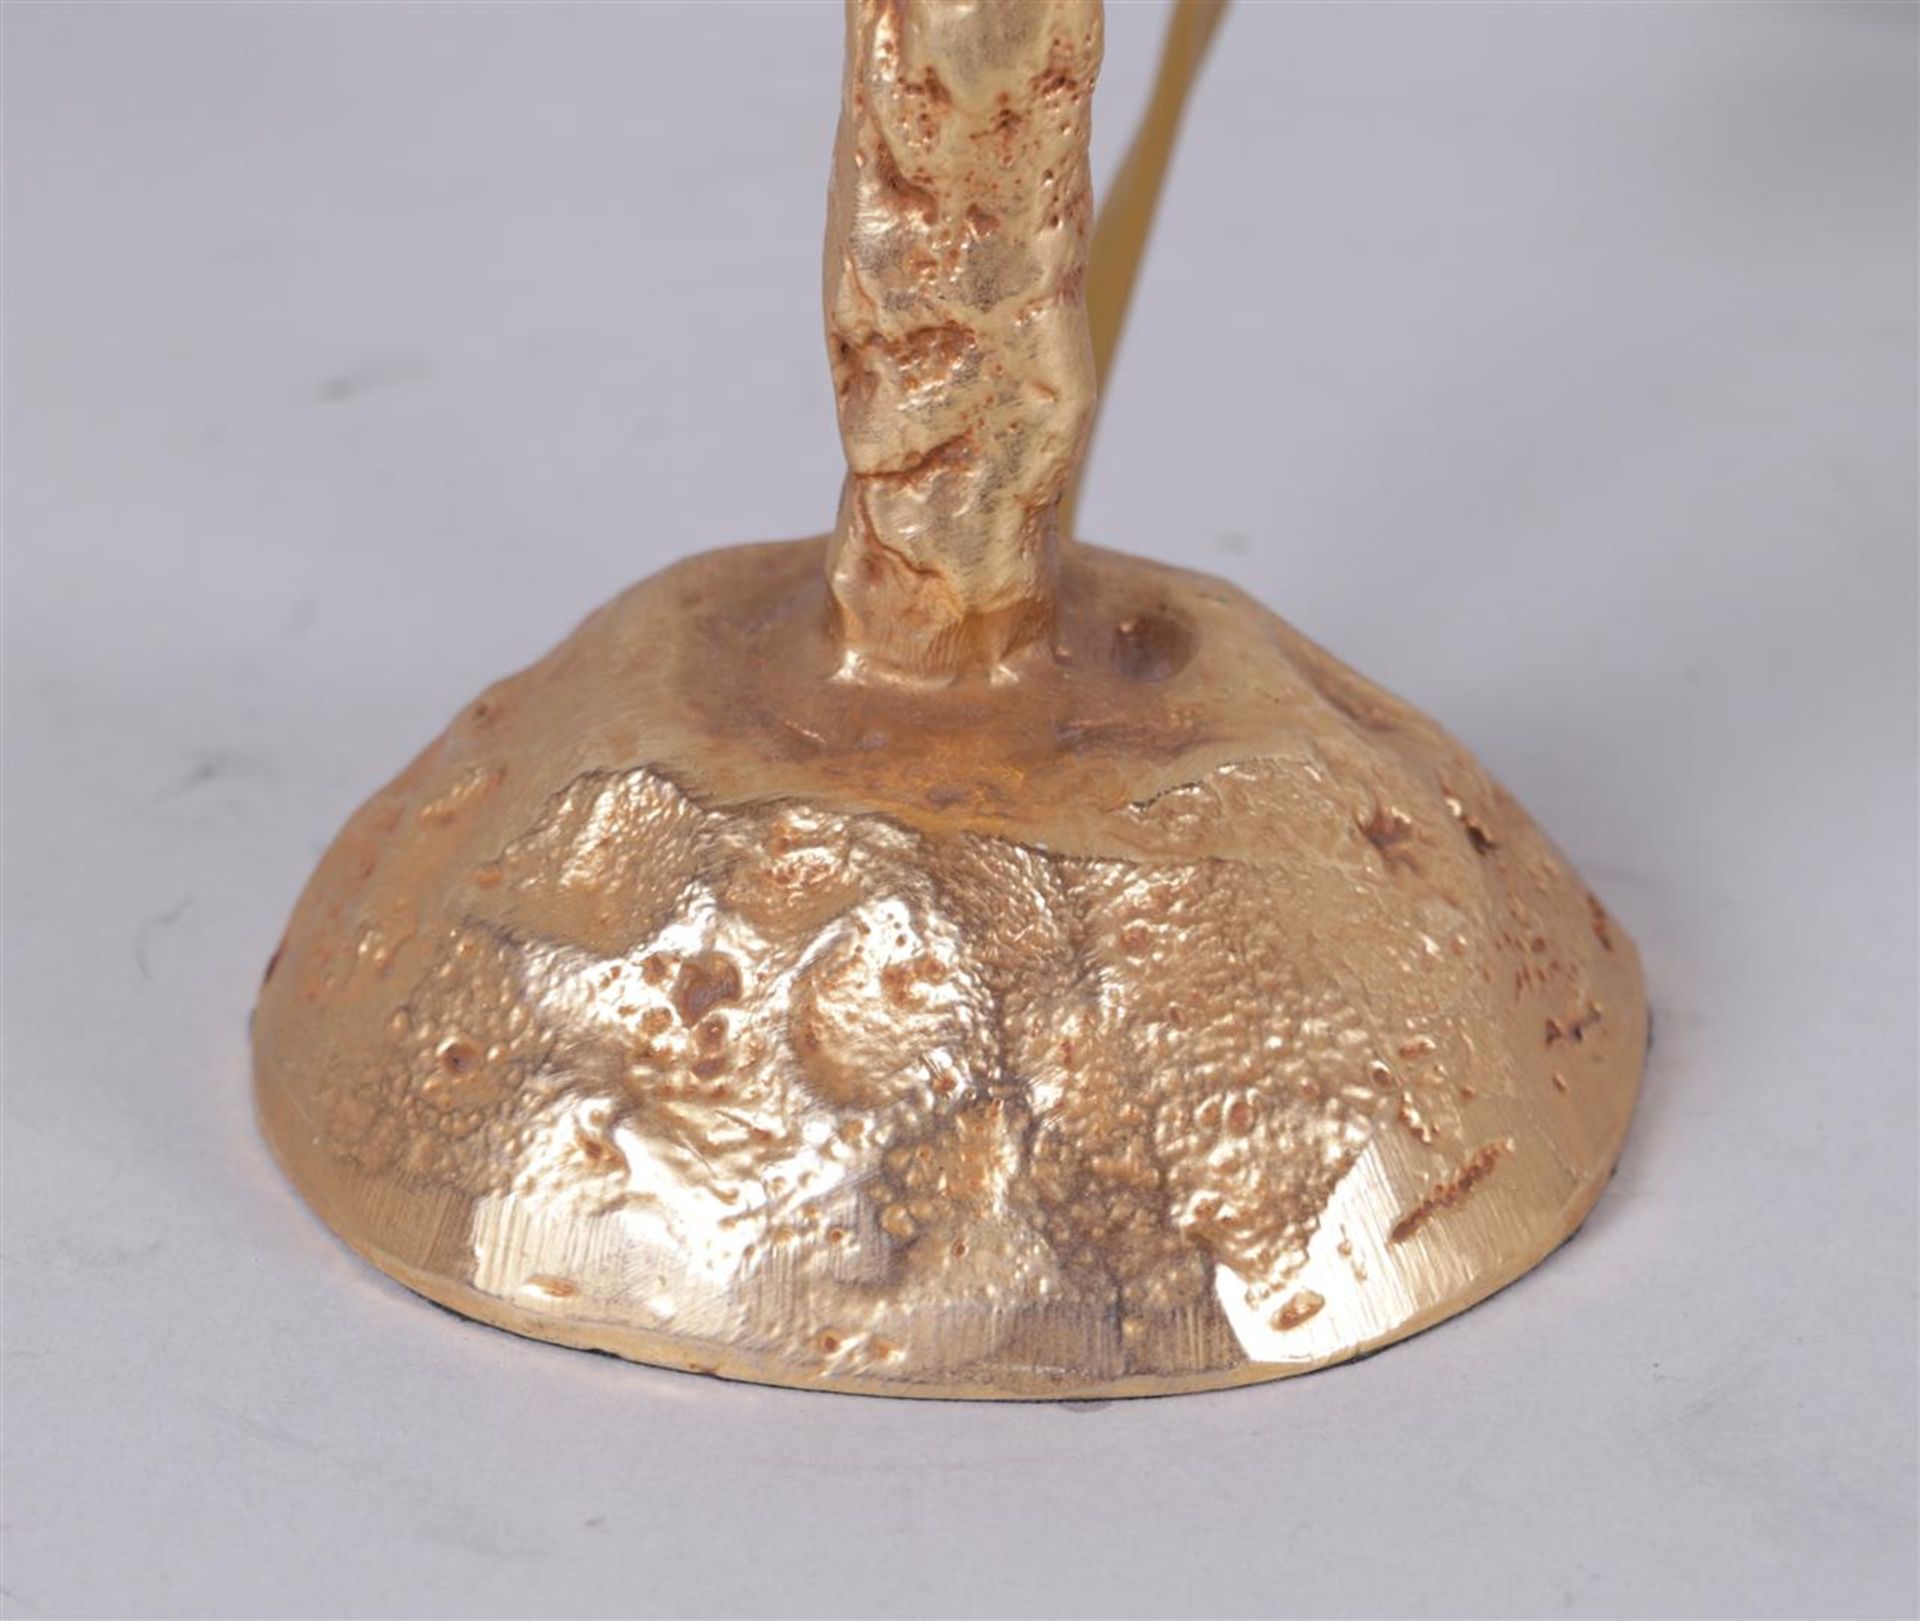 Pierre Casenove for Fondica, gold-plated lamp. Signed on the base.
H. 65 cm. - Image 2 of 3